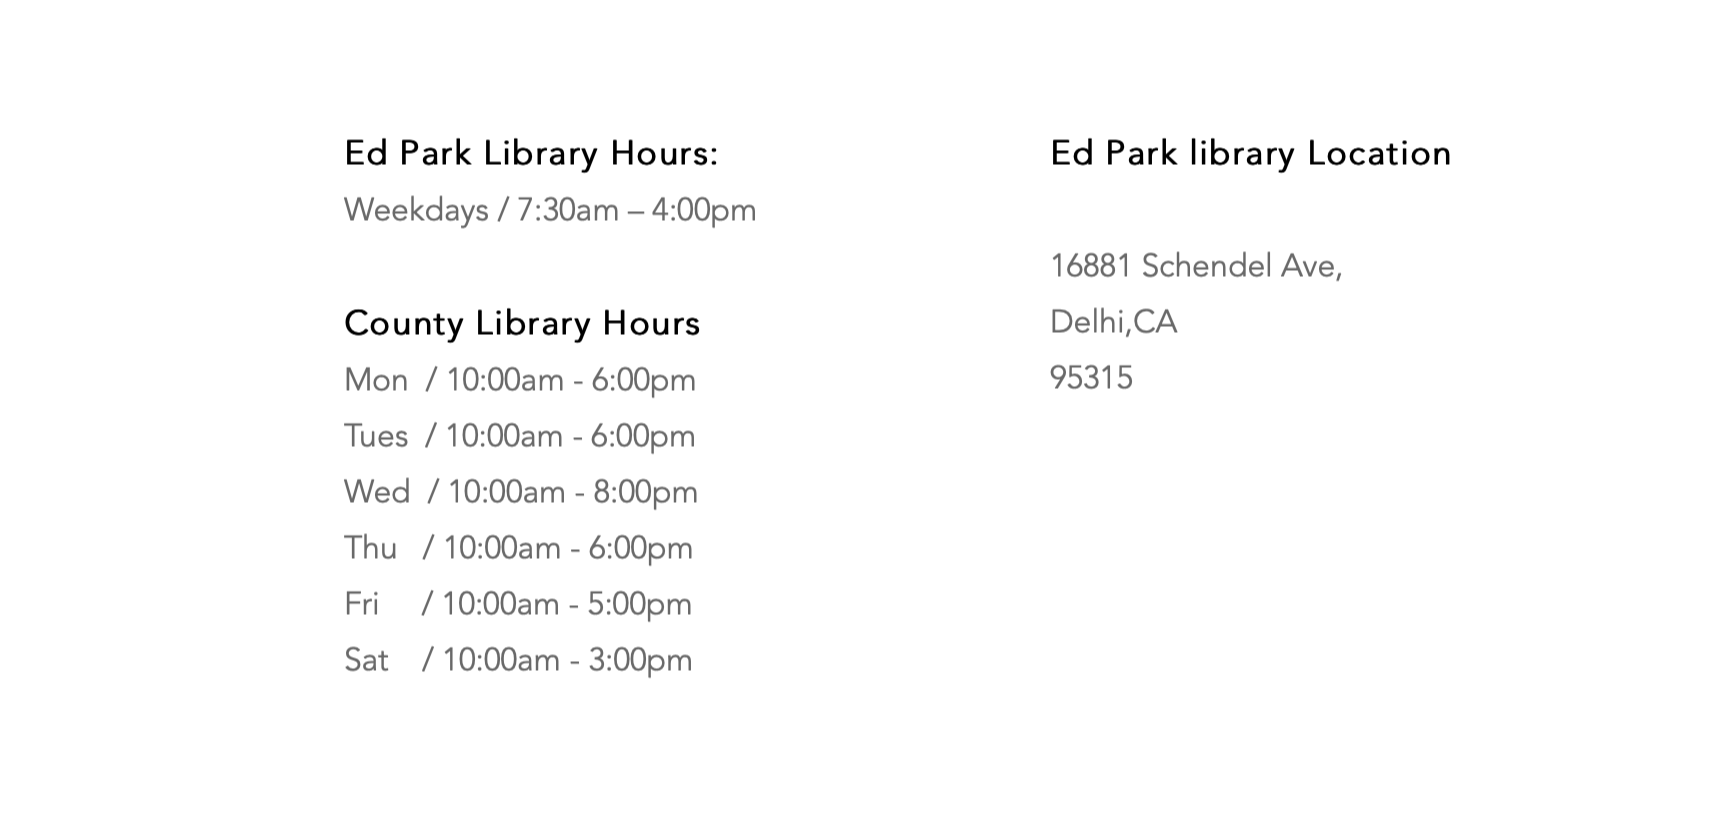  Come Visit Us! Ed Park Library Hours: ​Weekdays / 7:30am – 4:00pm  County Library Hours Mon  / 10:00am - 6:00pm Tues  / 10:00am - 6:00pm Wed  / 10:00am - 8:00pm Thu   / 10:00am - 6:00pm Fri     / 10:00am - 5:00pm Sat    / 10:00am - 3:00pm Ed Park library Location  16881 Schendel Ave,  Delhi,CA ​95315 Contact Info  Phone: 209-656-2049 ex.2049  Email:  jrojas@delhiusd.org ​nnightengale@delhiusd.org